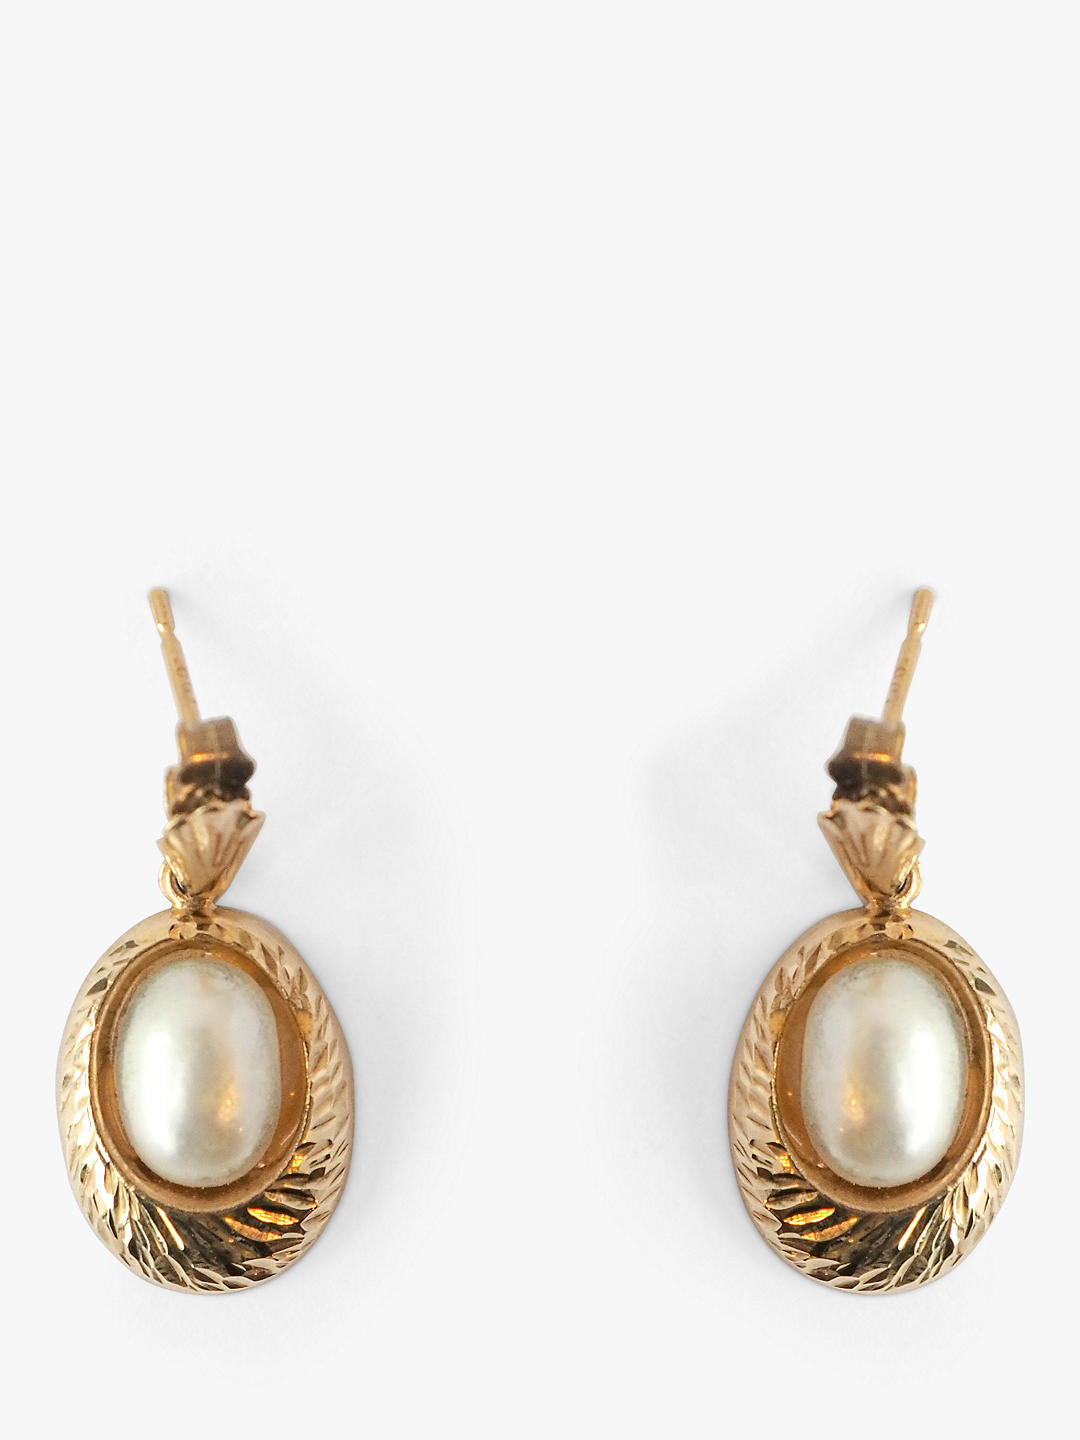 L & T Heirlooms Second Hand 9ct Yellow Gold Oval Pearl Drop Earrings, Gold